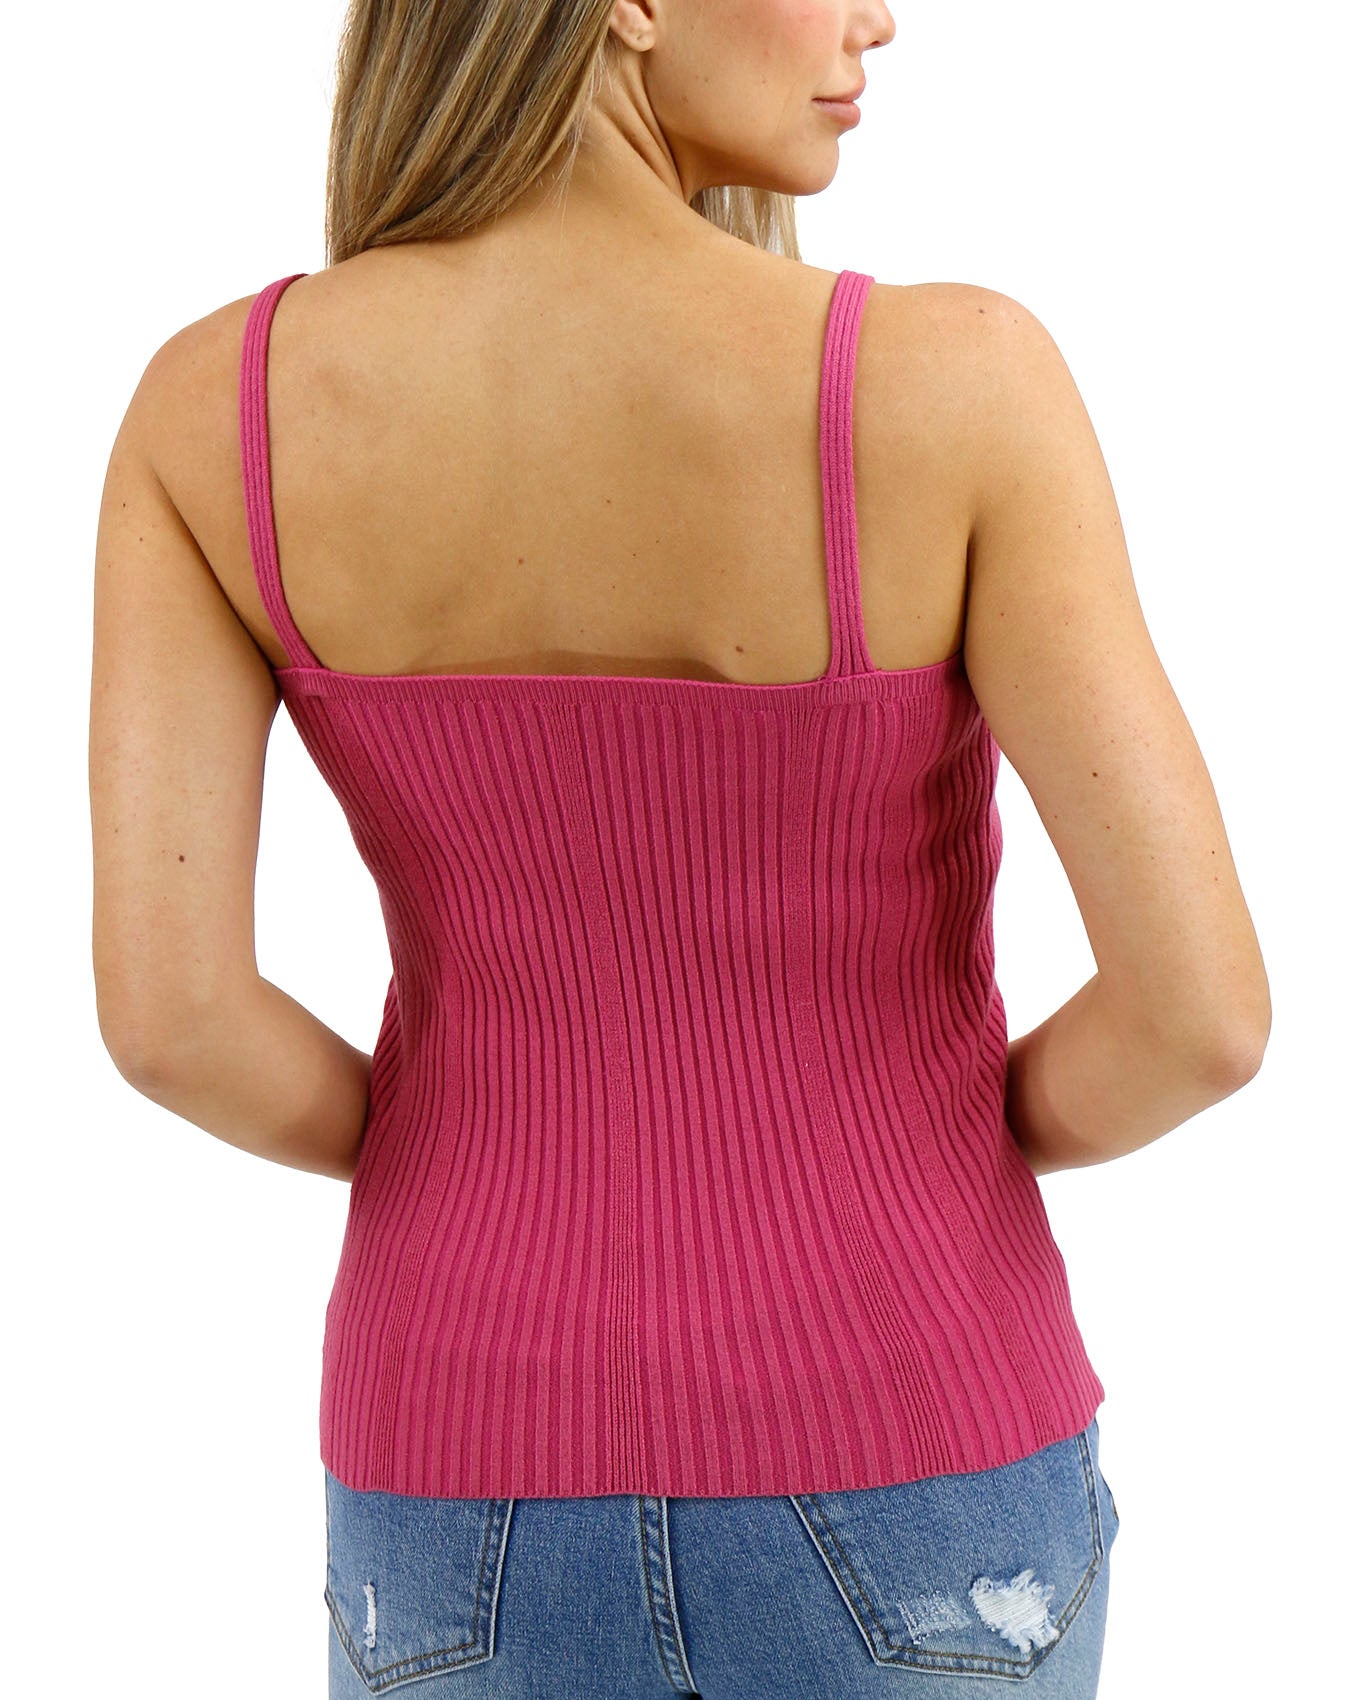 Back stock shot of Cactus Flower Ribbed Knit Cami Top